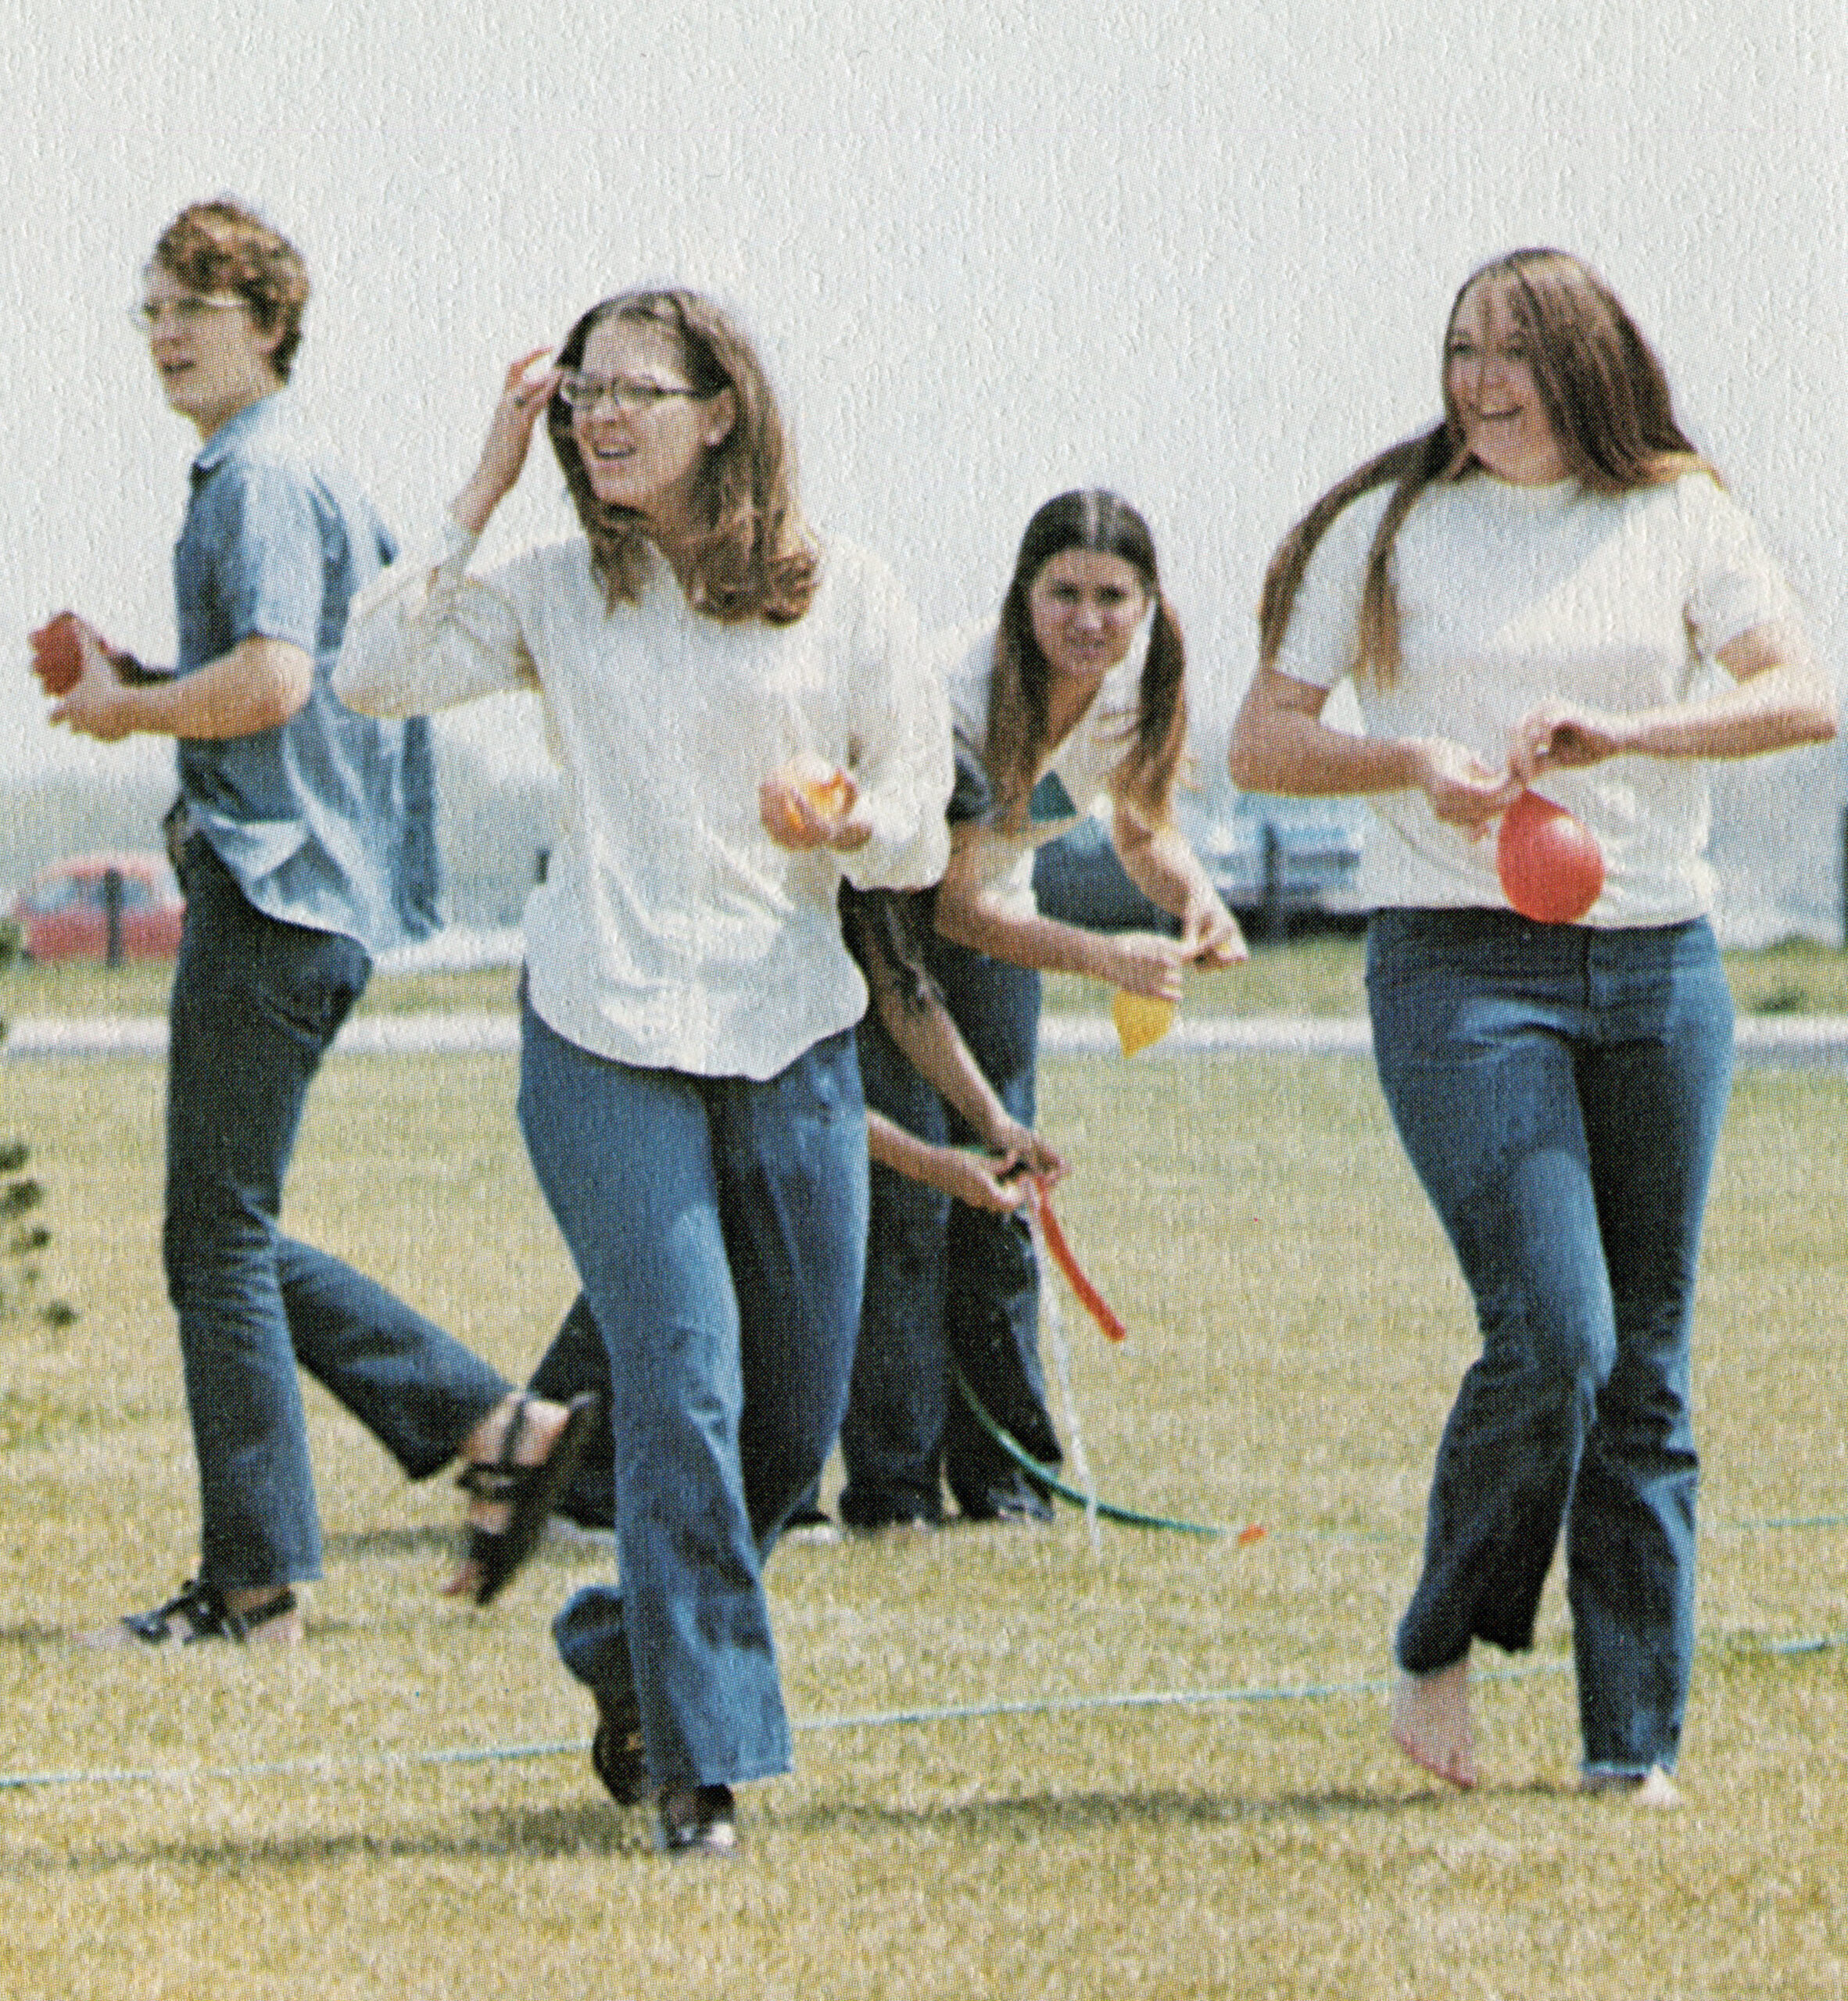 Students get ready for the water balloon fight in the grassy area between the north and south parking lots during the inaugural Spring Fling in 1972. [College Archives]